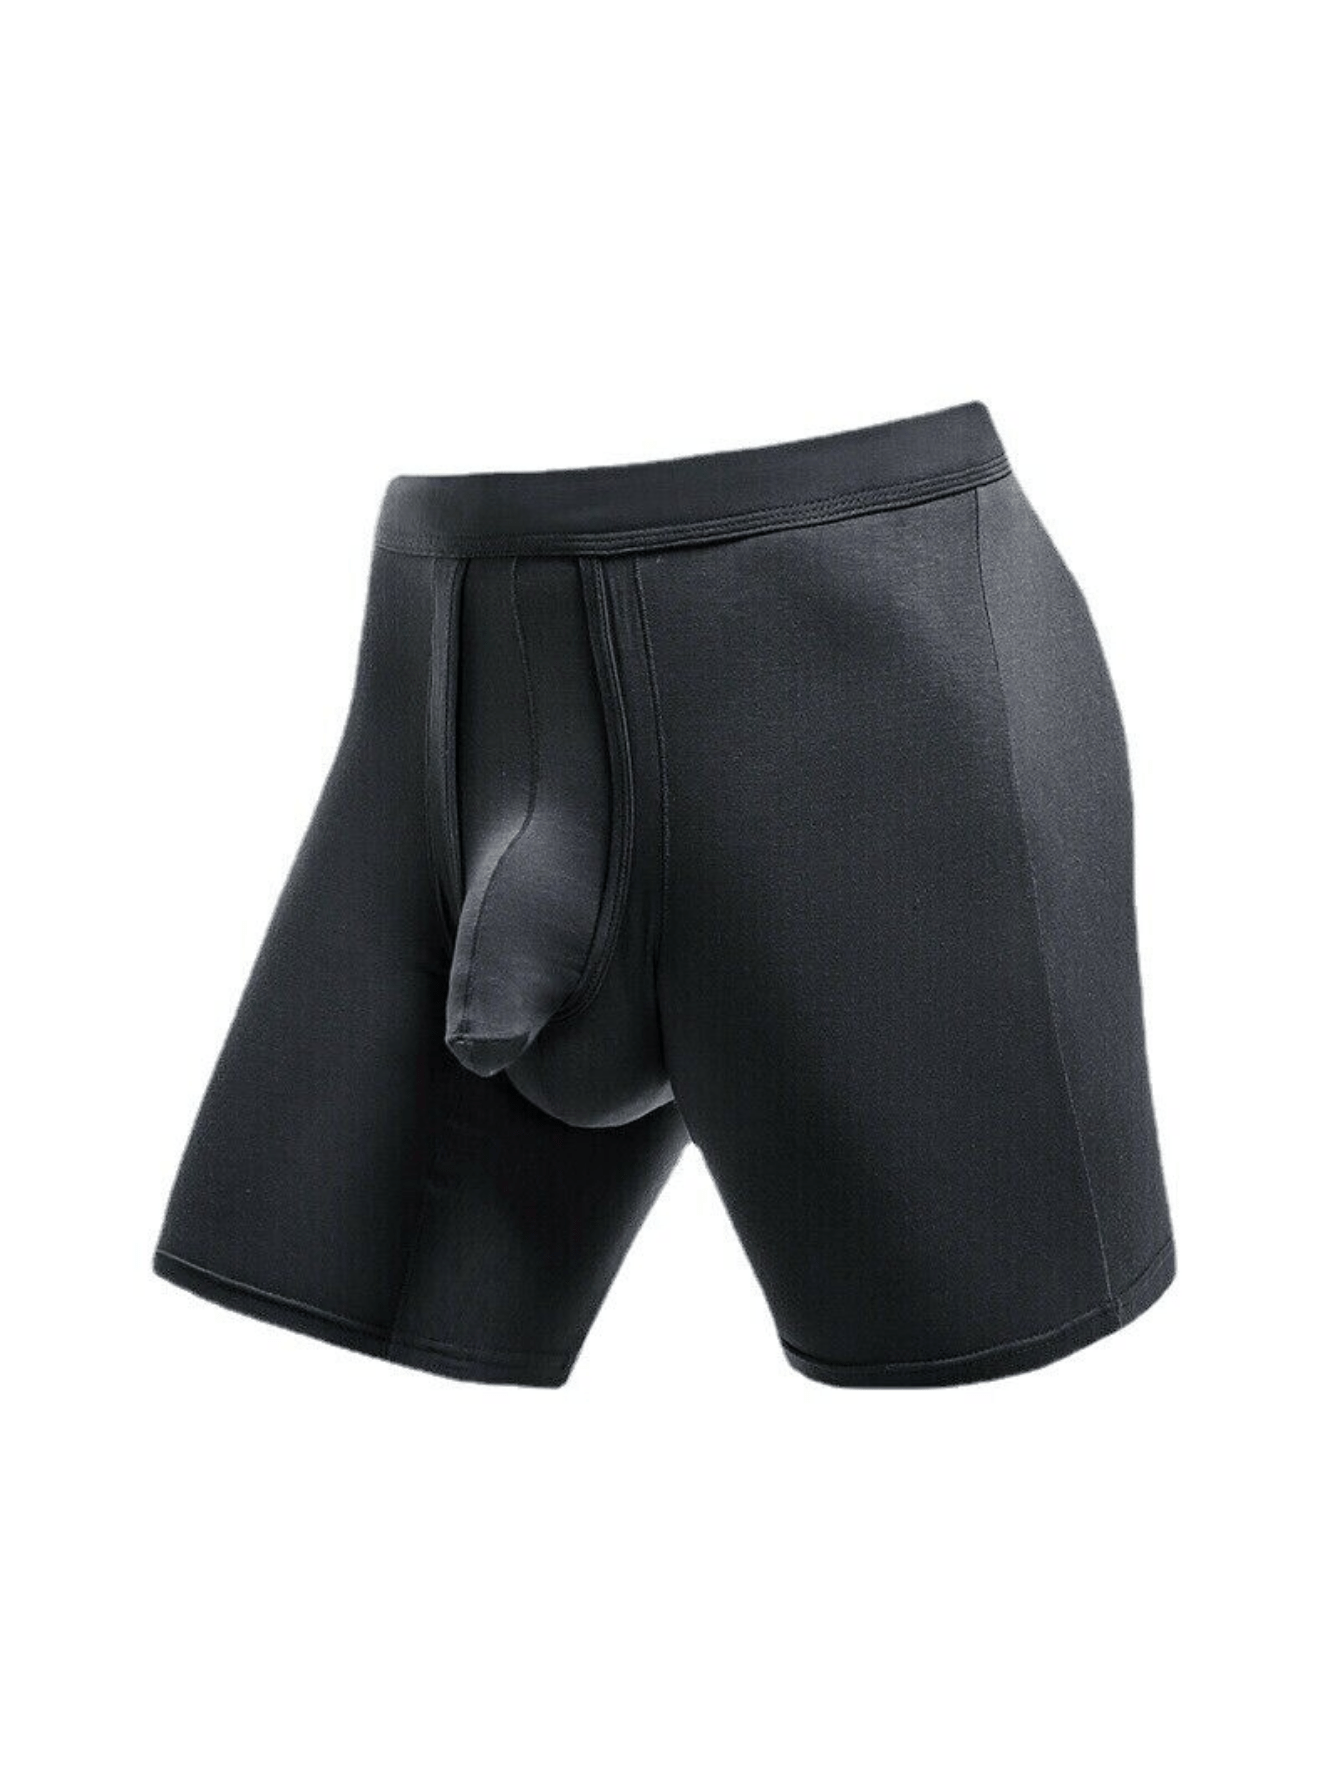 Soccer Ball Football Black Personalized Men's Underwear Chafe Proof Pouch  Boxer Brief at  Men's Clothing store